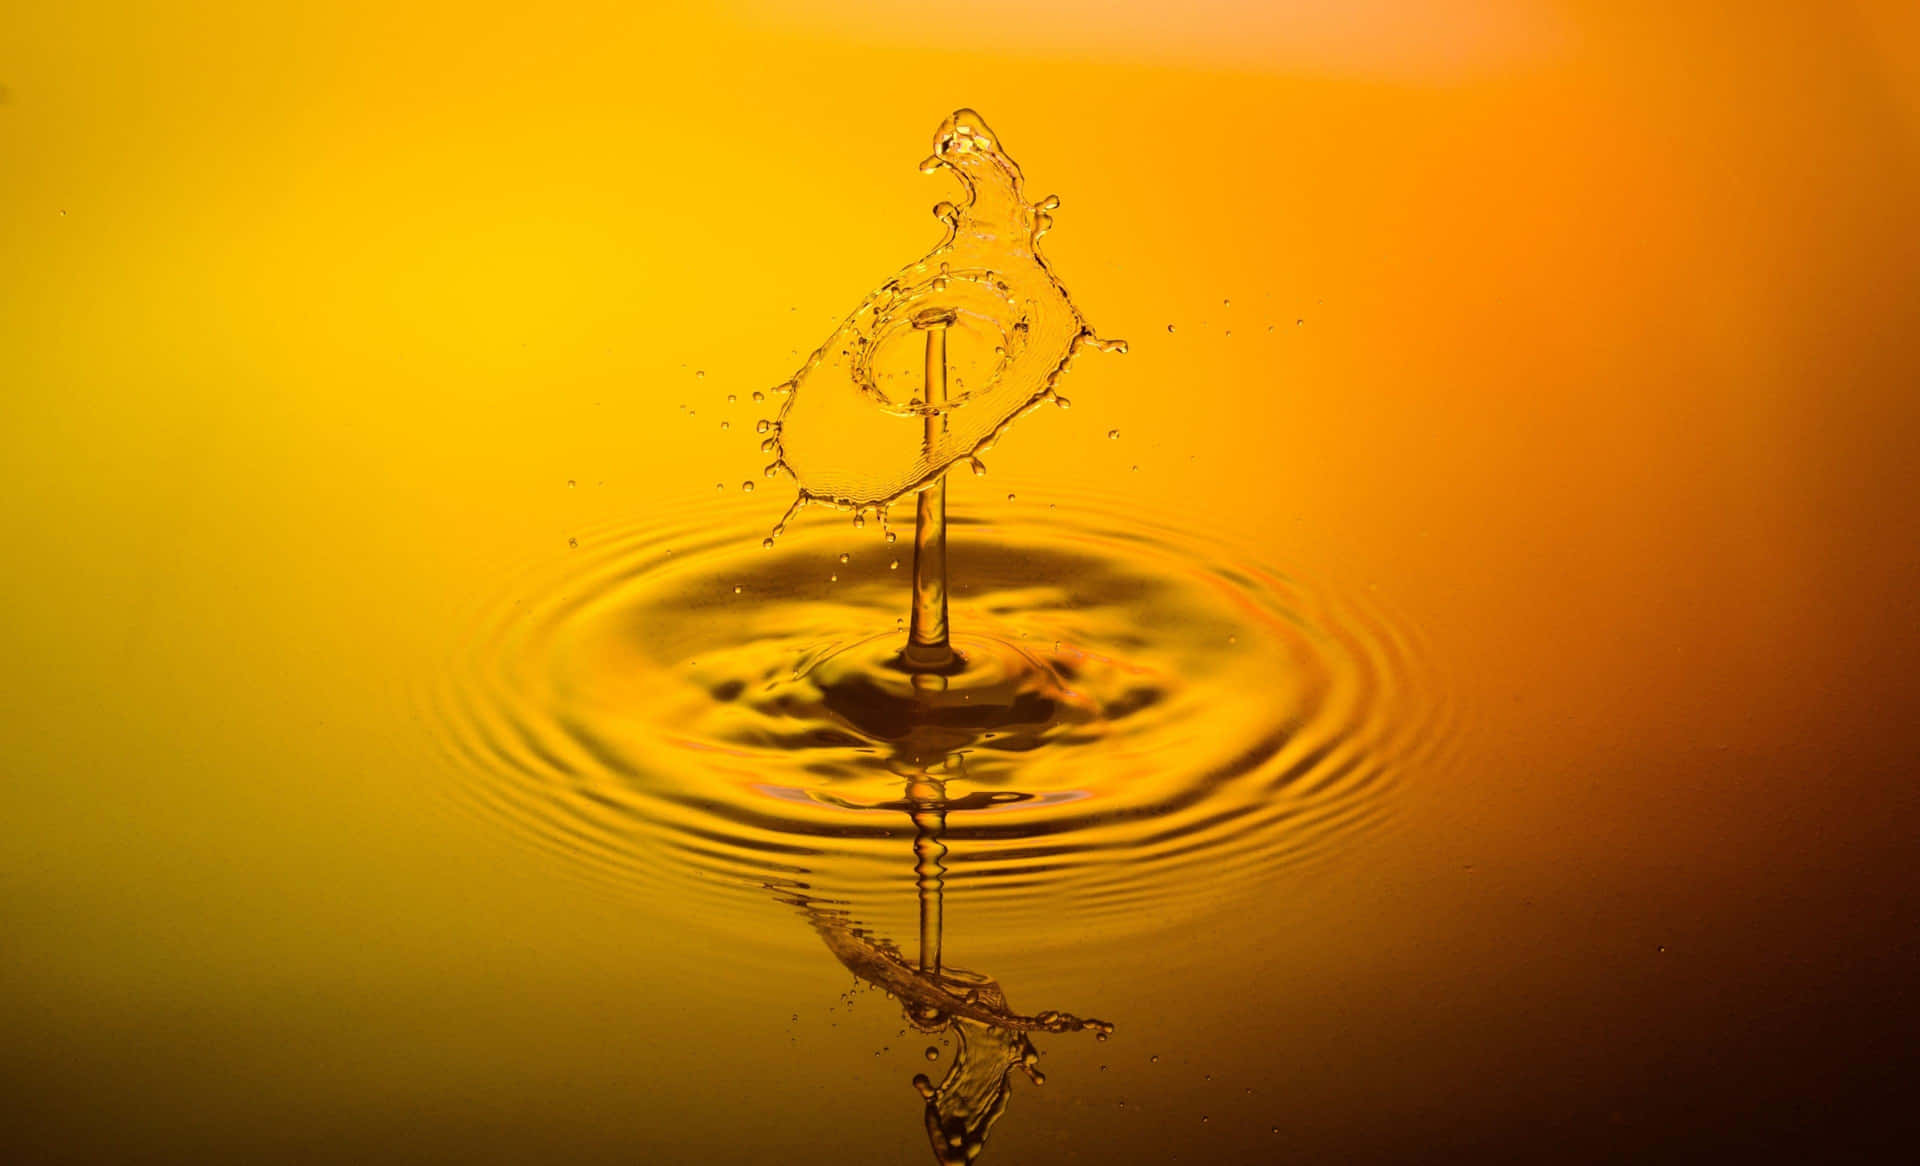 Capturing Water Drops in Motion